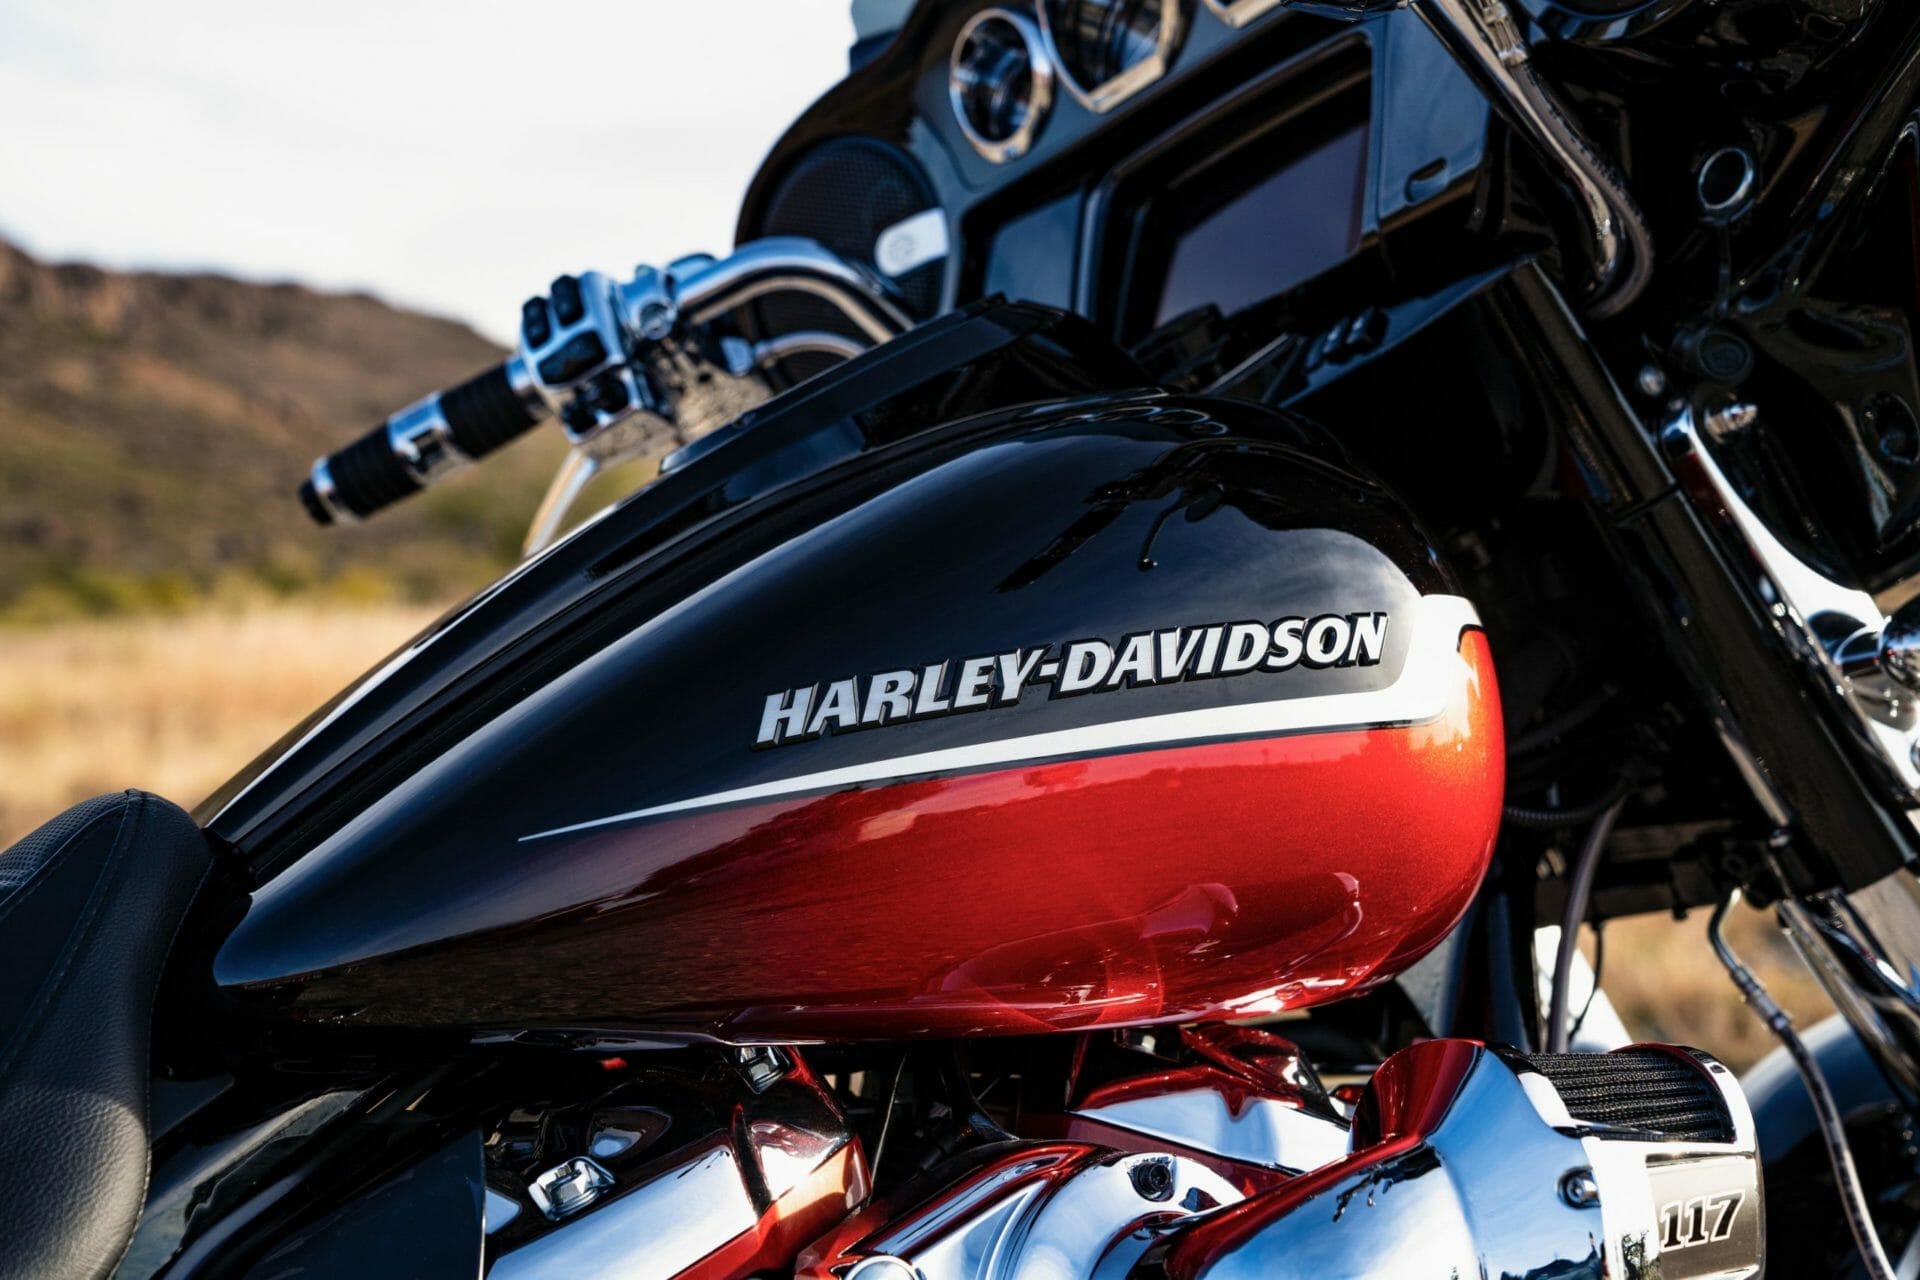 Harley-Davidson - EU punitive tariffs not yet off the table
- also in the MOTORCYCLES.NEWS APP